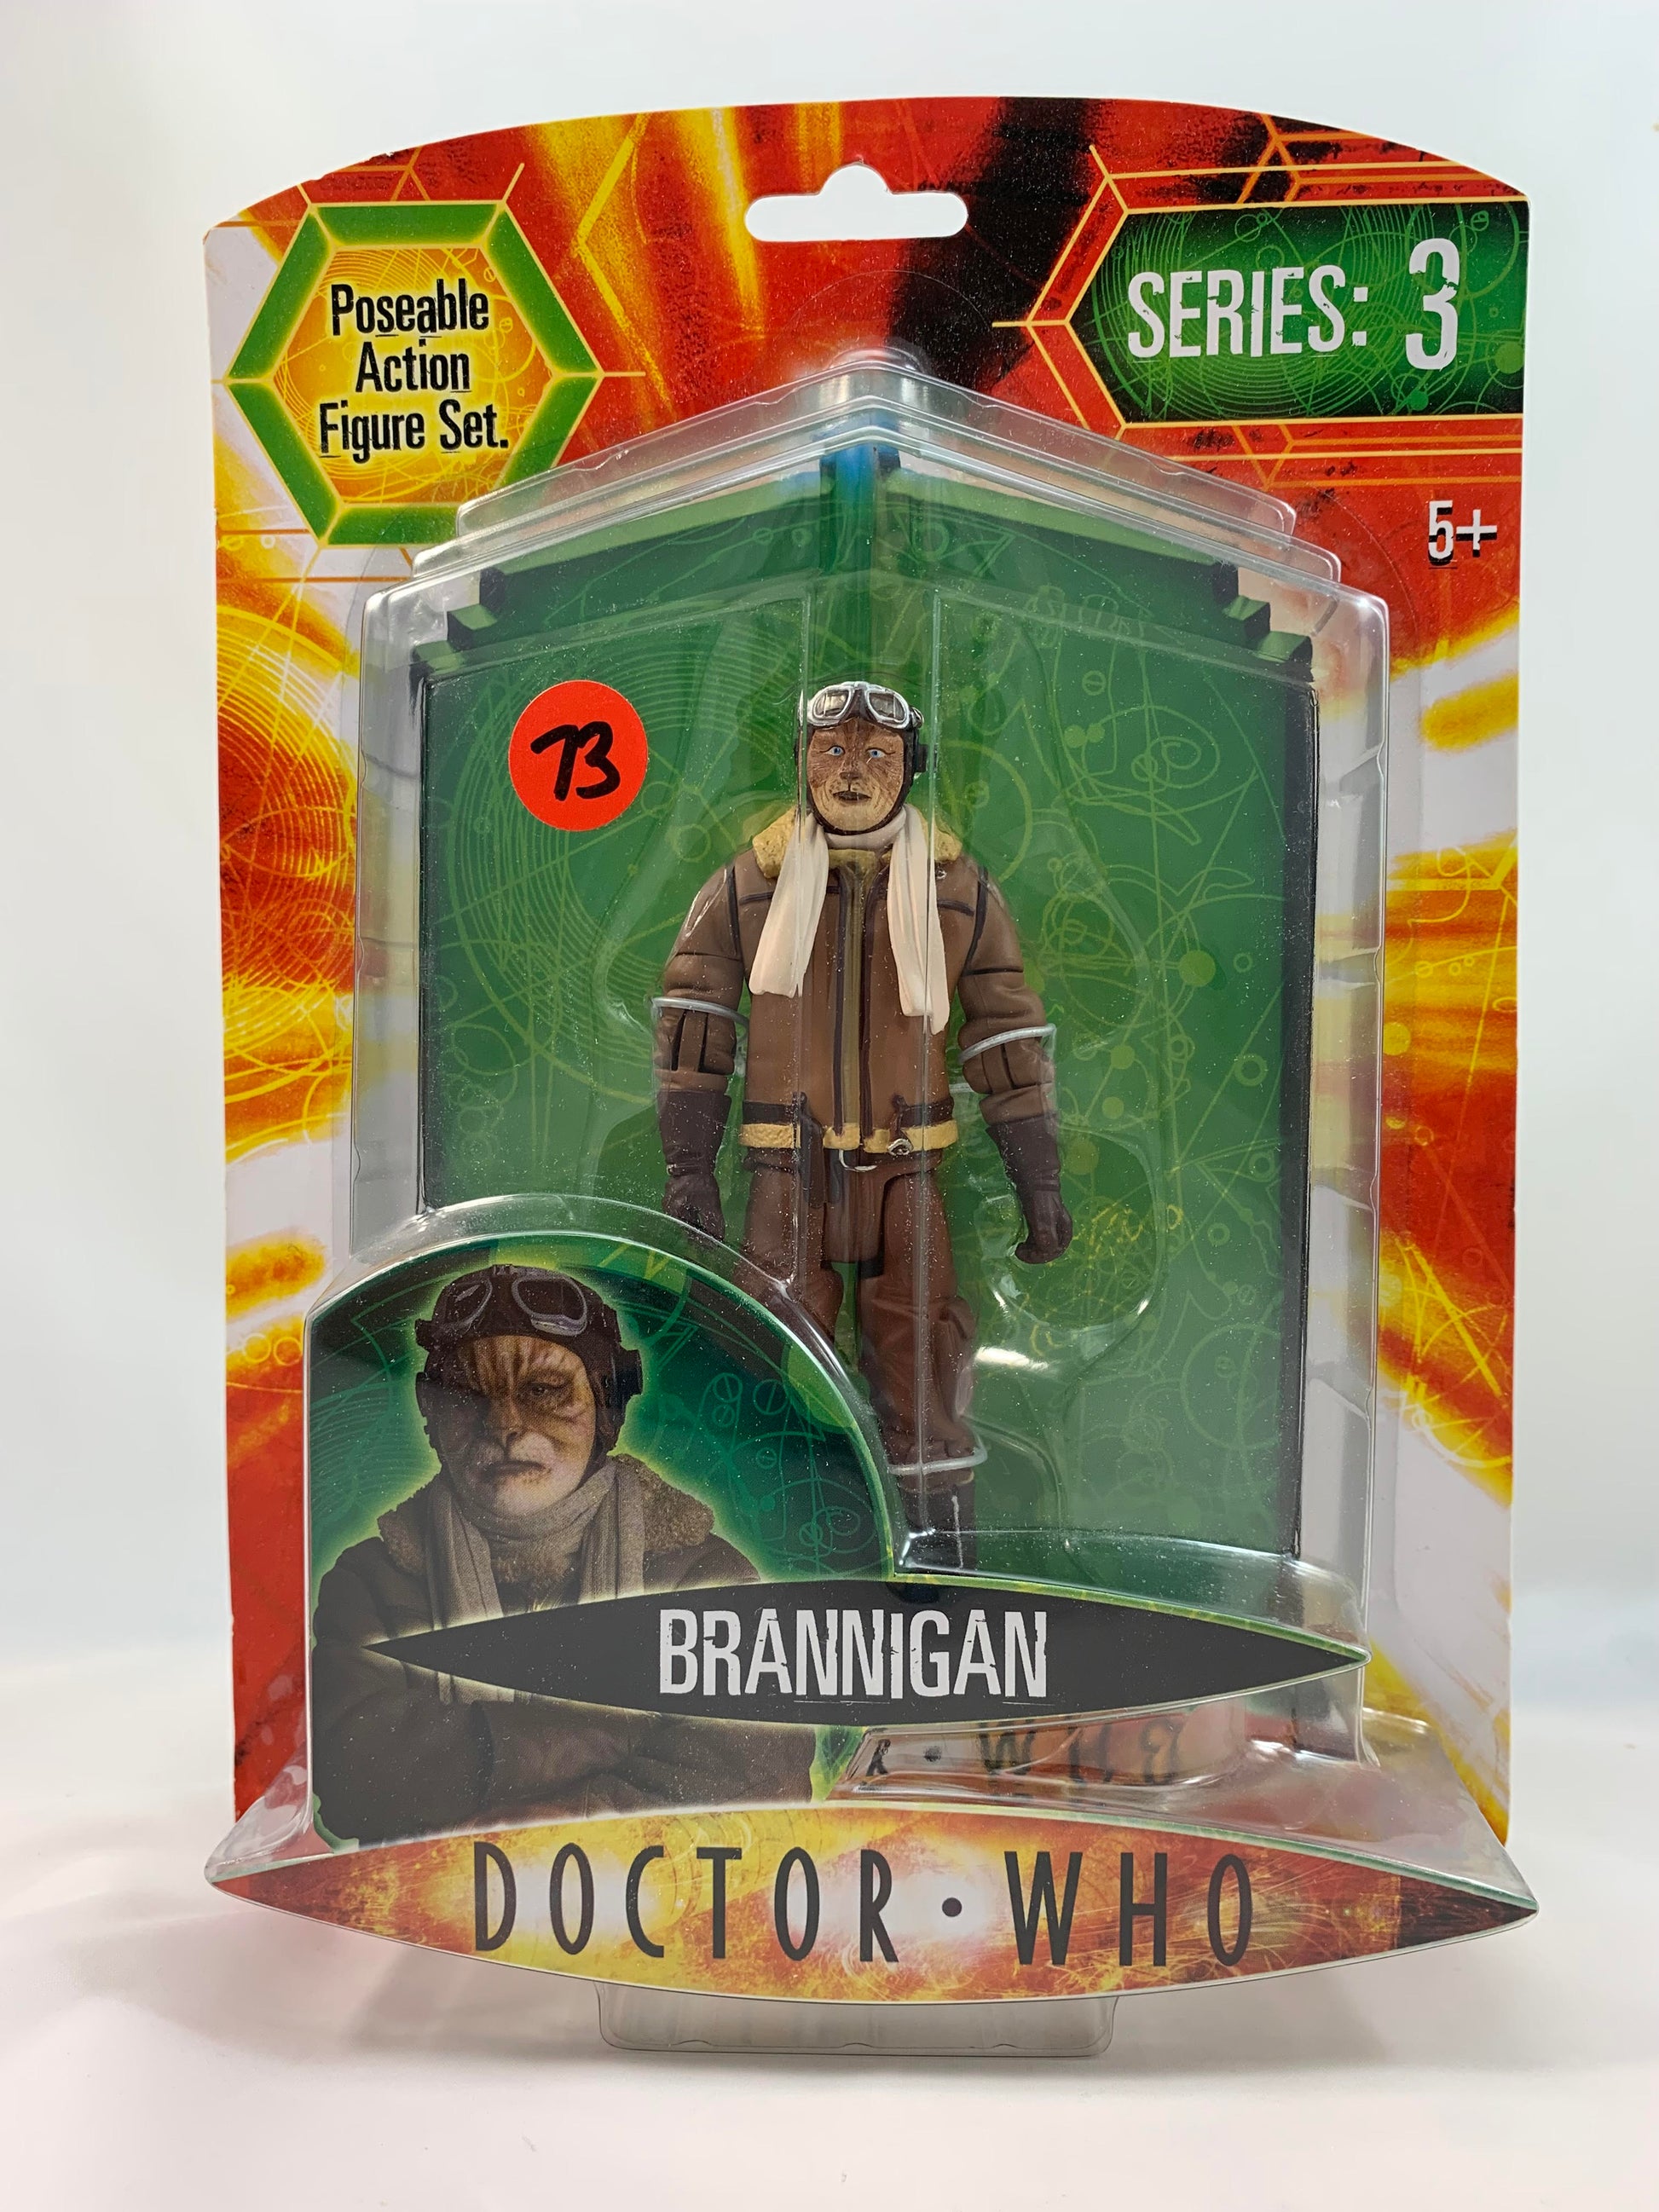 Charater Options MOC Doctor Who Action figure Series 3 - Branigan 2008 - MOC